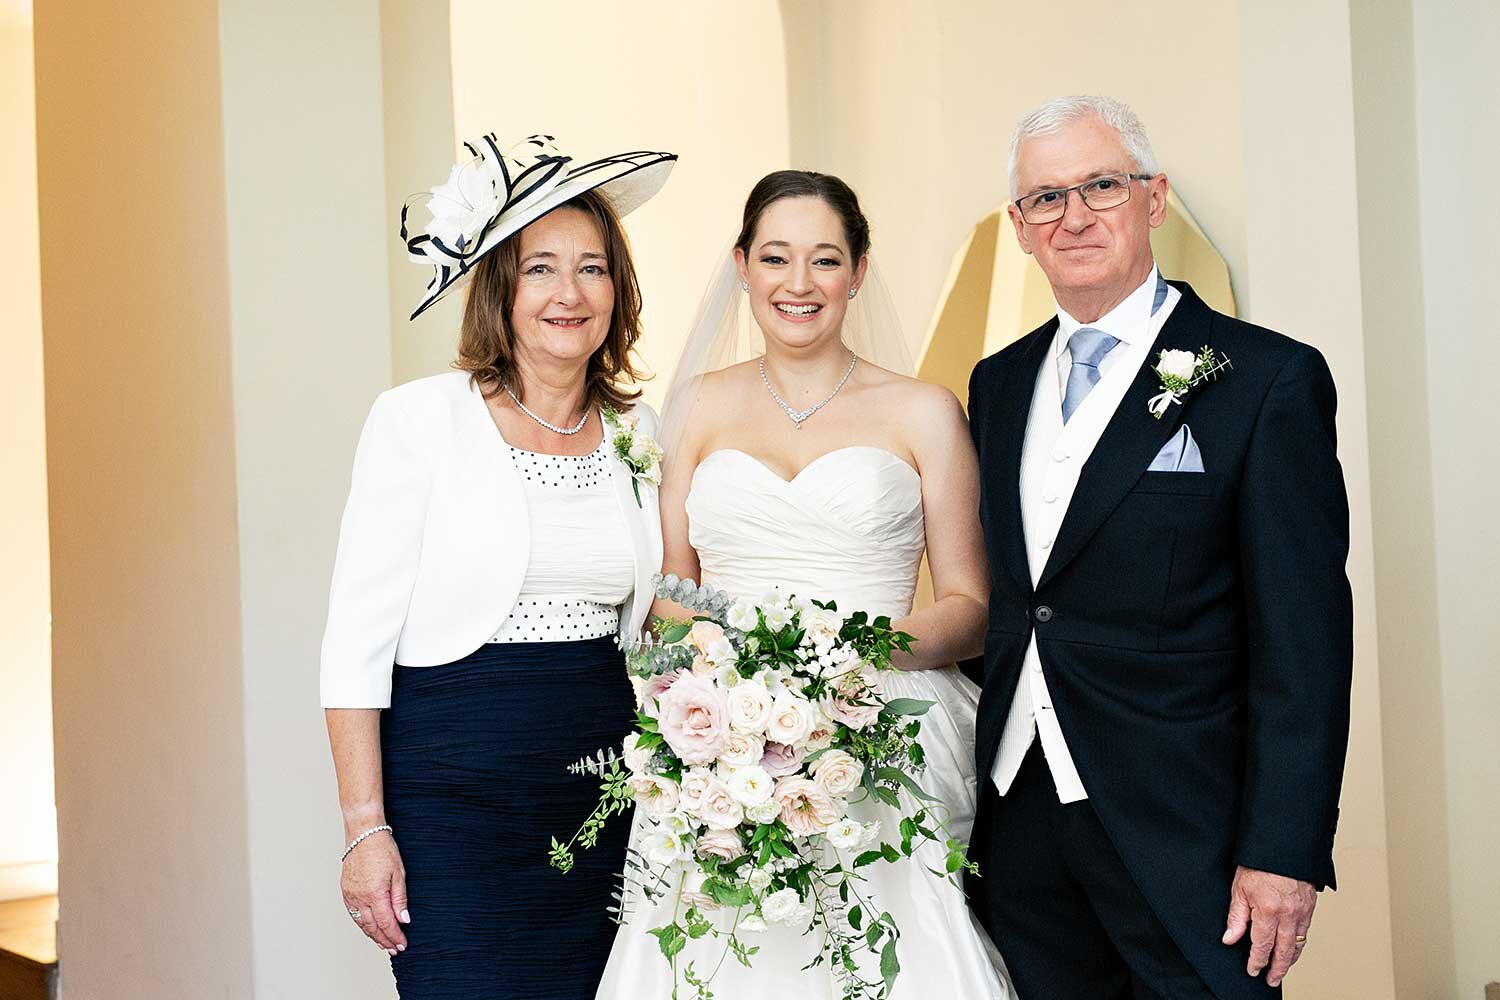 bride-with-mother-and-father-wedding-photography-norwich.jpg